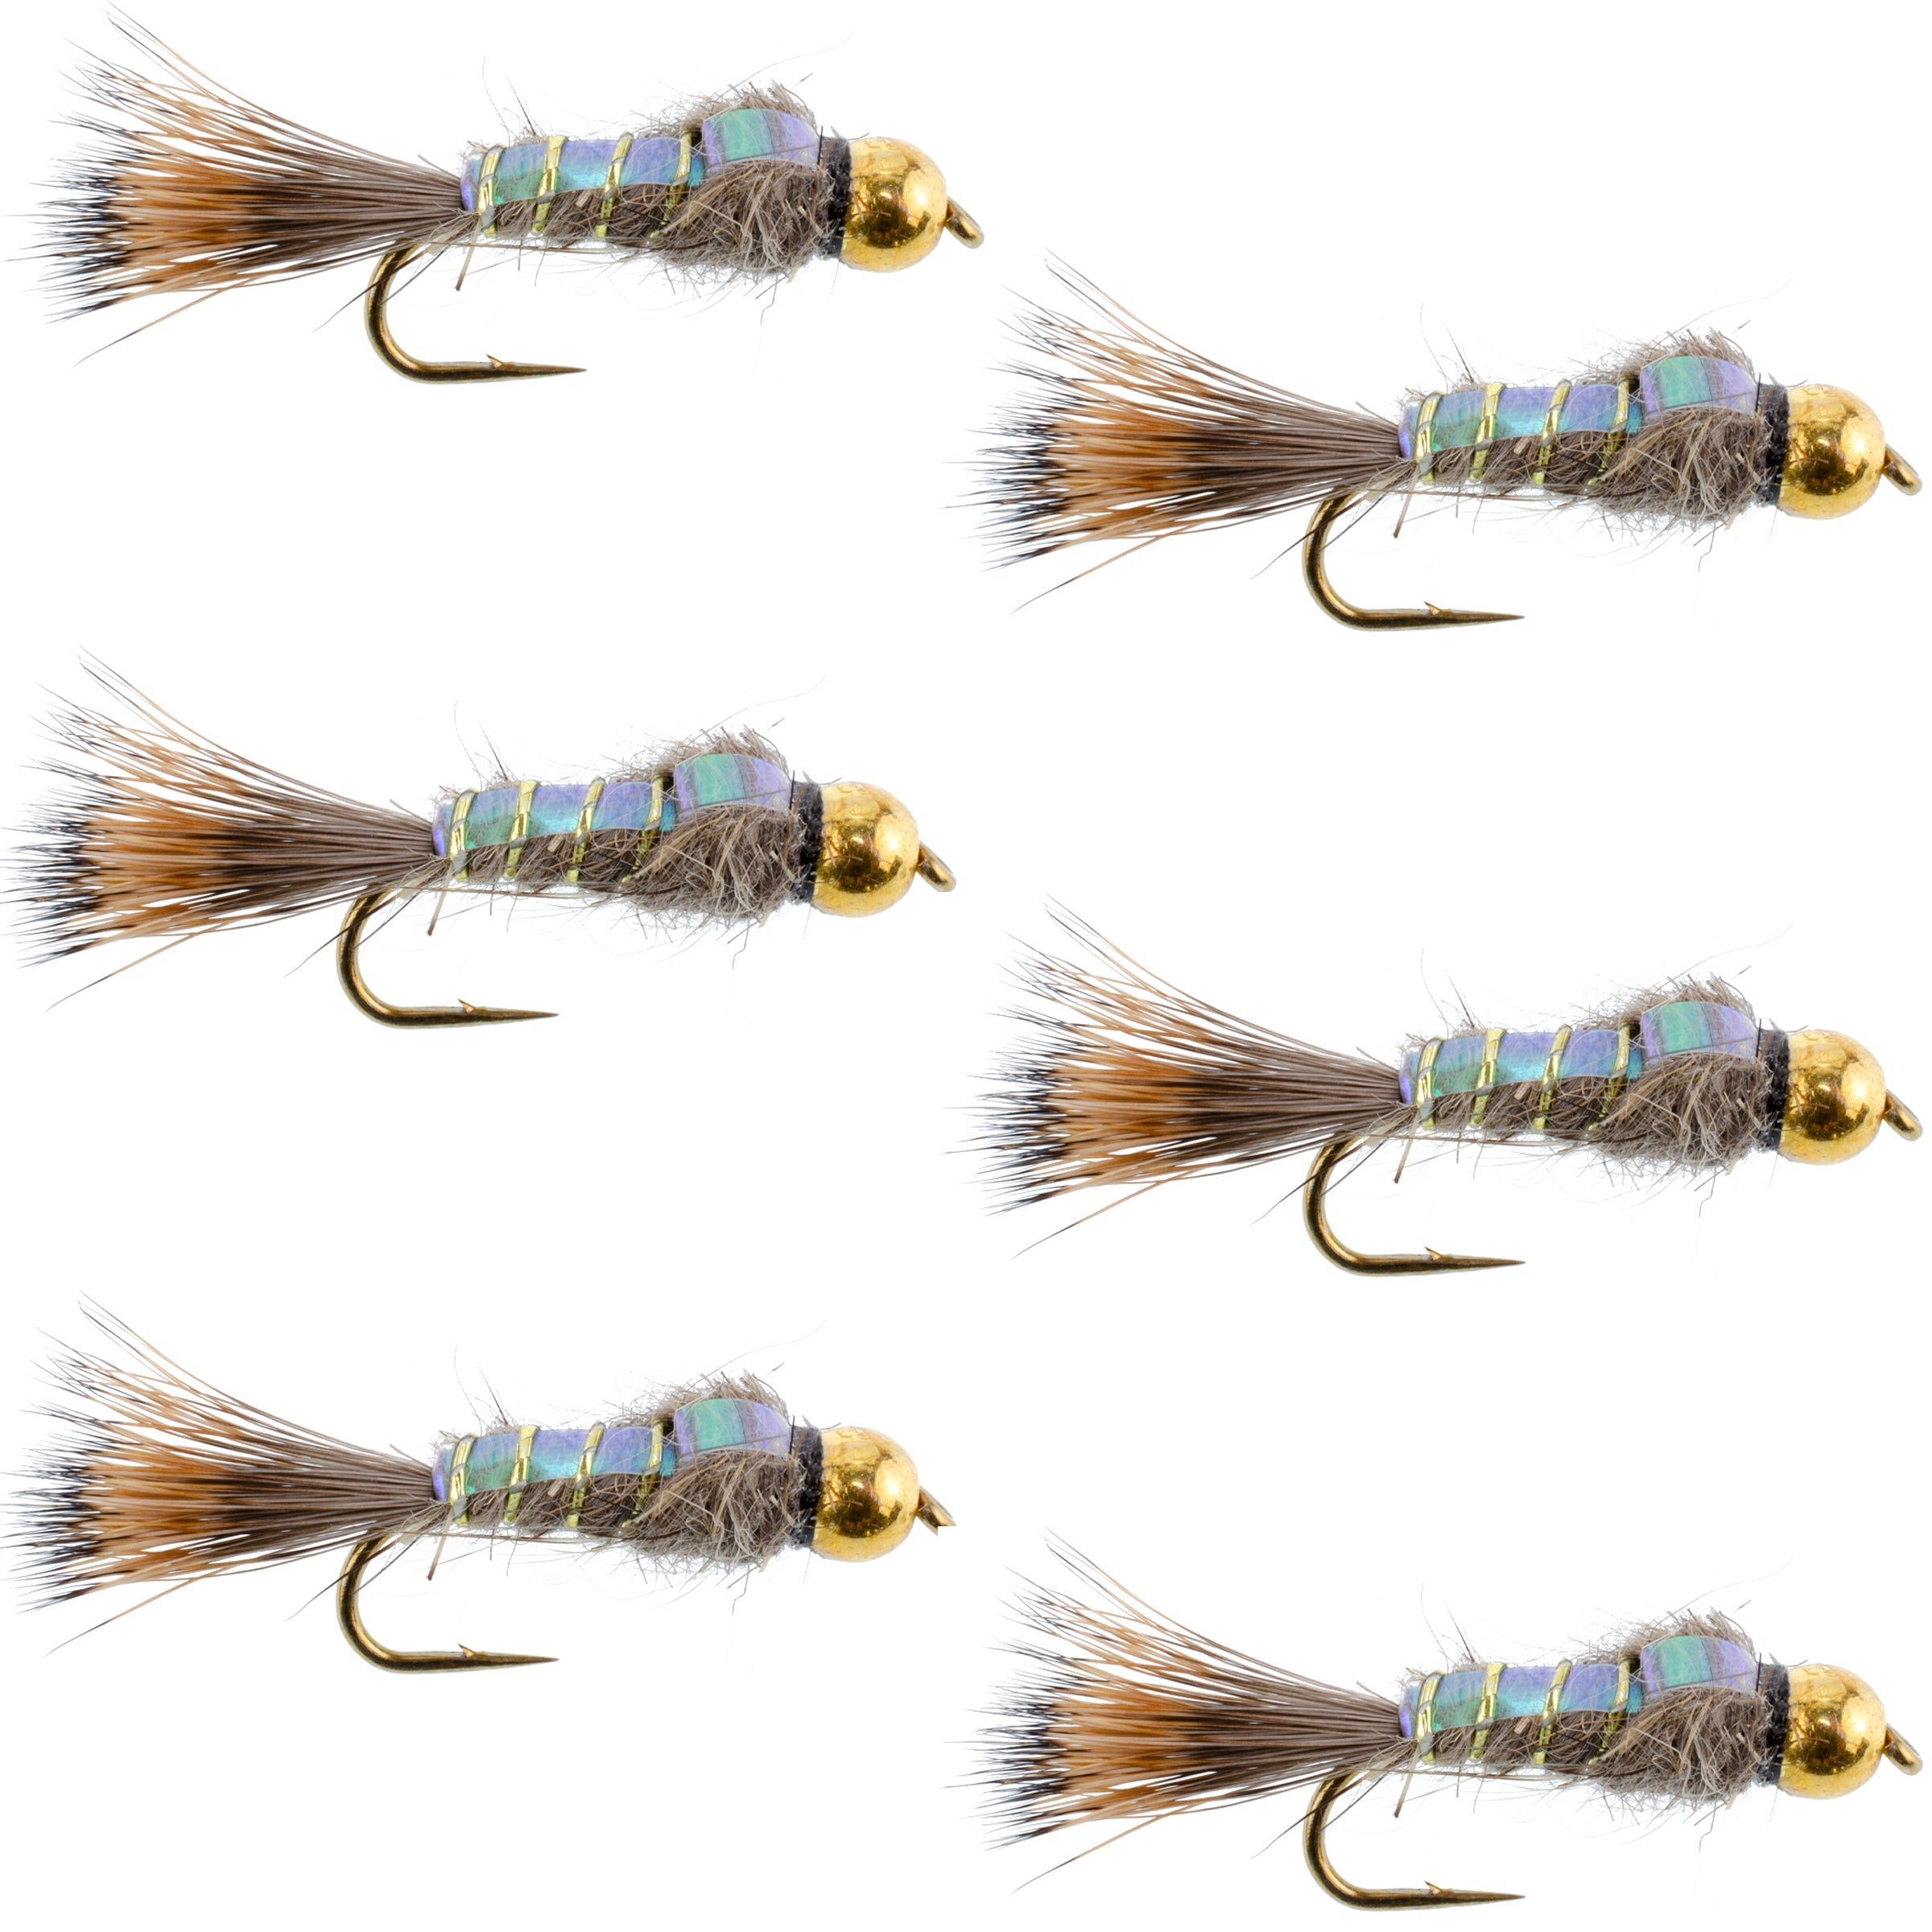 Tungsten Bead Head Nymph Fly Fishing Flies - Flashback Gold Ribbed Hare's Ear Trout Fly - Nymph Wet Fly - 6 Flies Hook Size 12